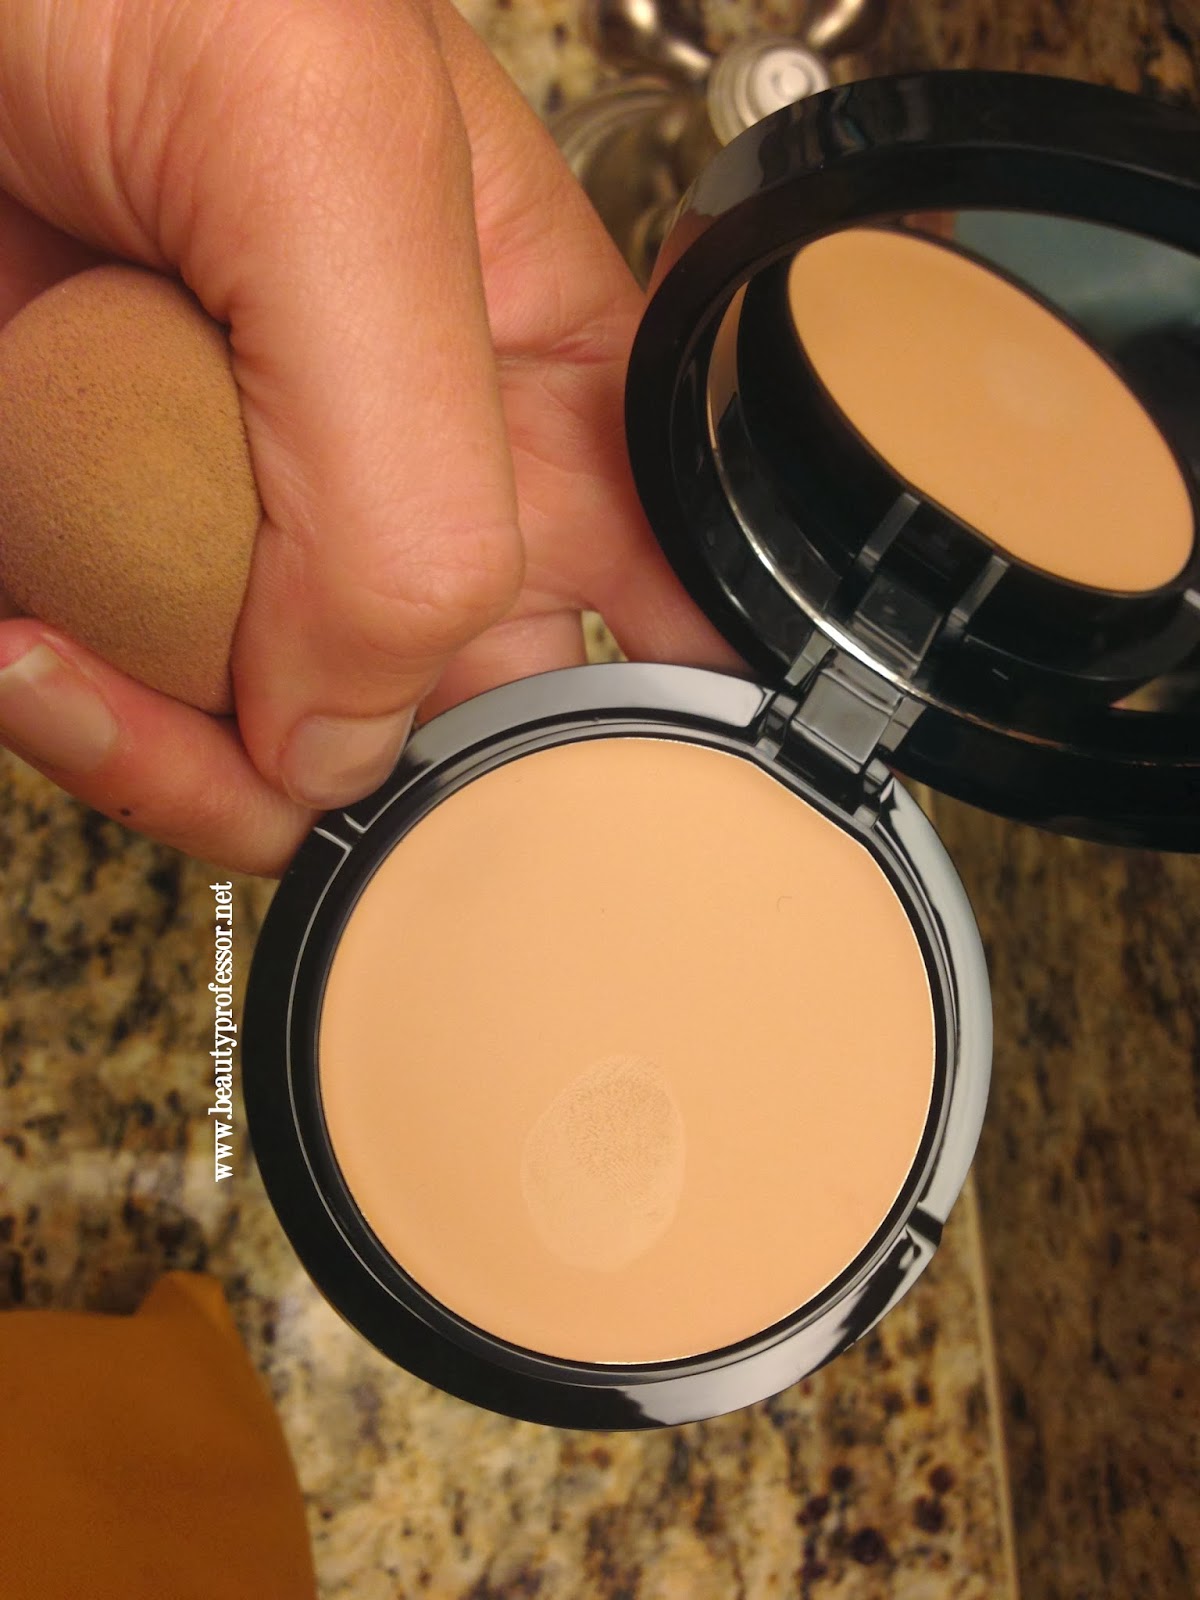 Giorgio Armani Maestro Fusion Makeup Compact...First Impressions + Swatches of All Shades! | Beauty |